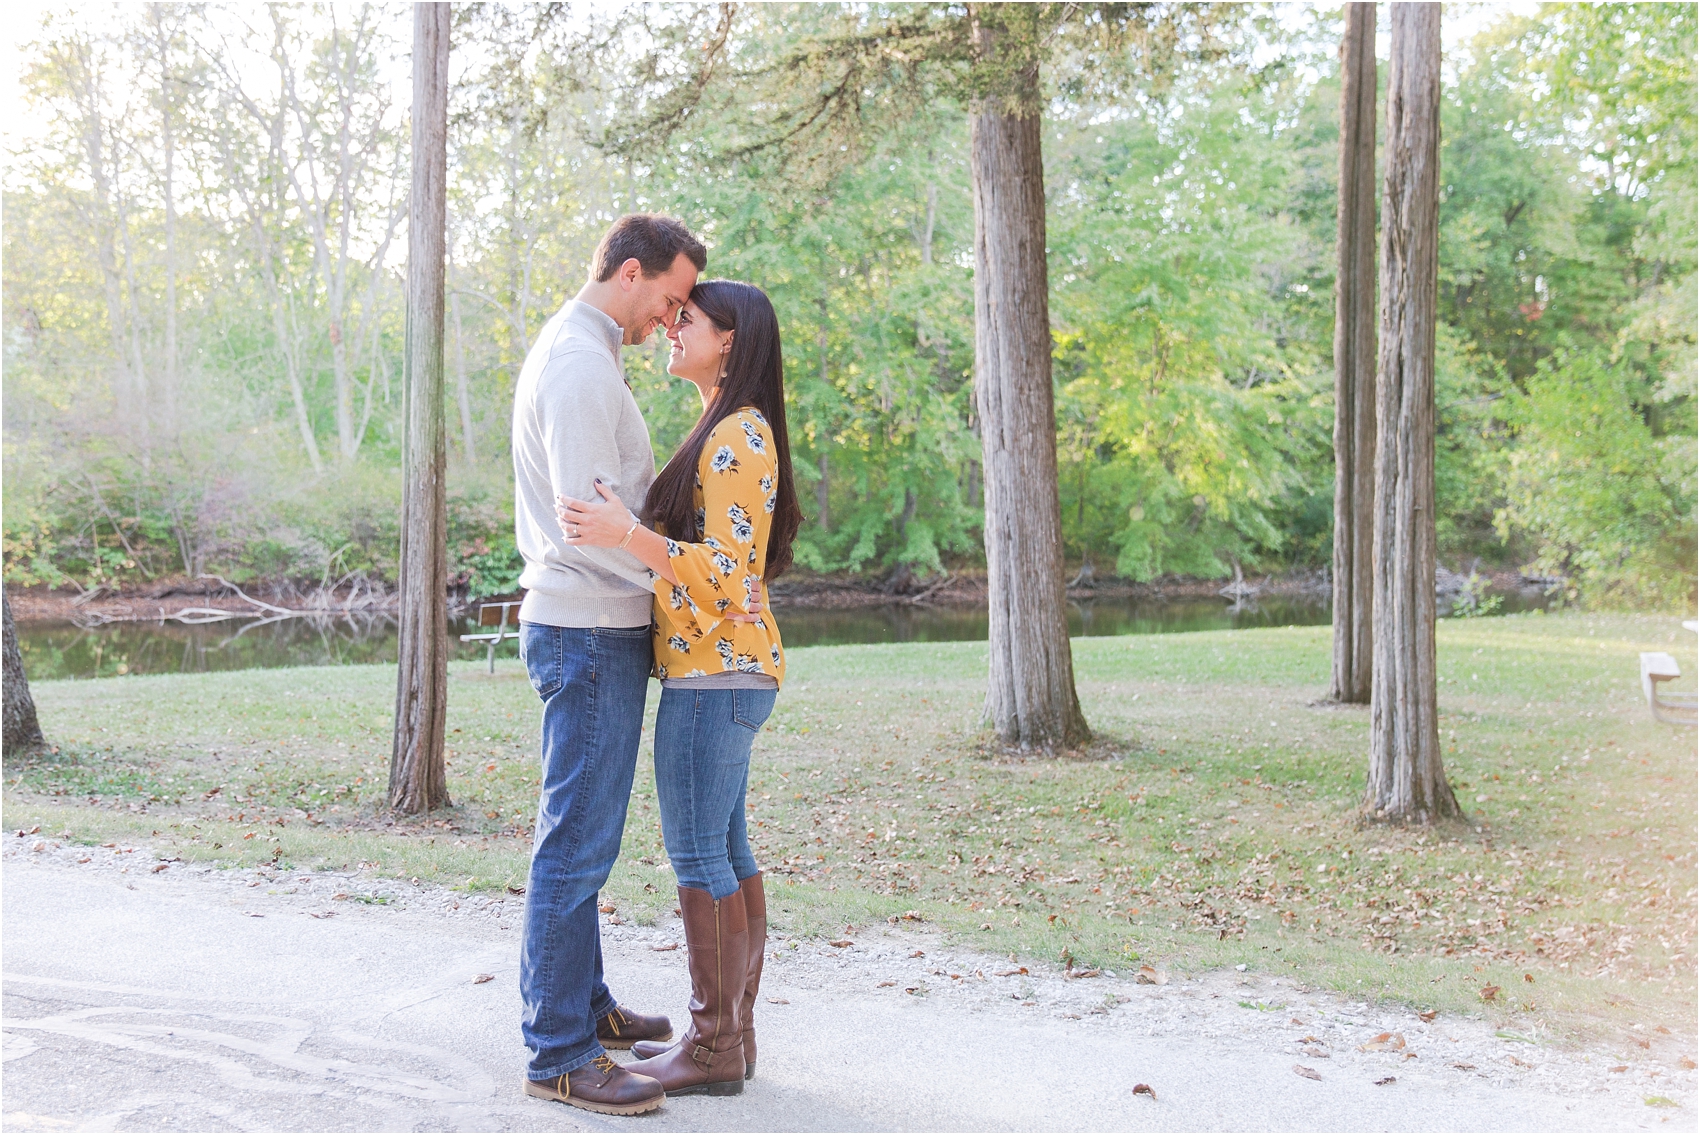 relaxed-autumn-engagement-photos-at-hudson-mills-metropark-in-dexter-mi-by-courtney-carolyn-photography_0043.jpg